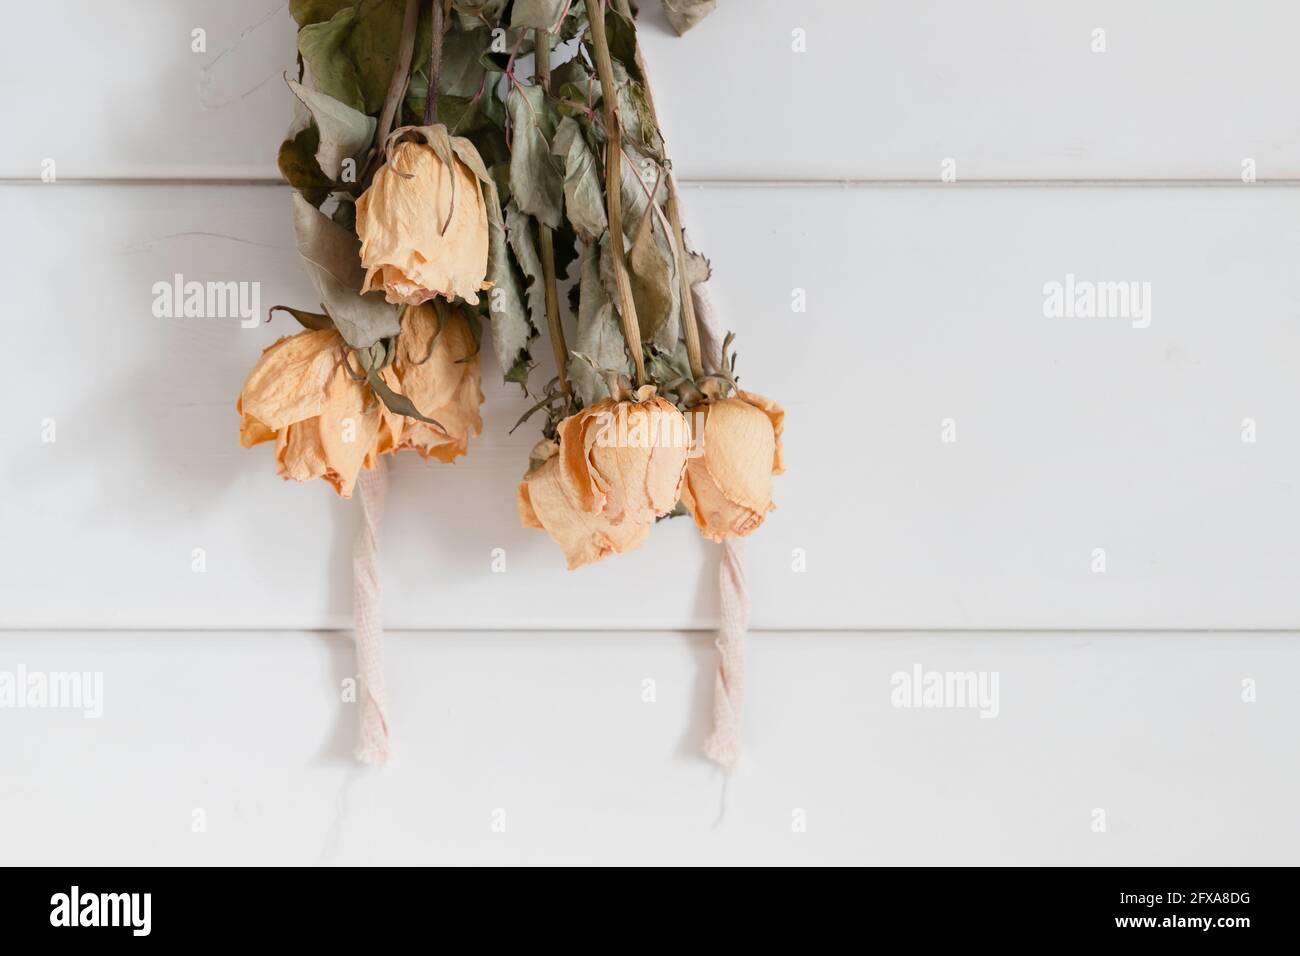 Yellow roses drying upside down on white wooden wall Stock Photo